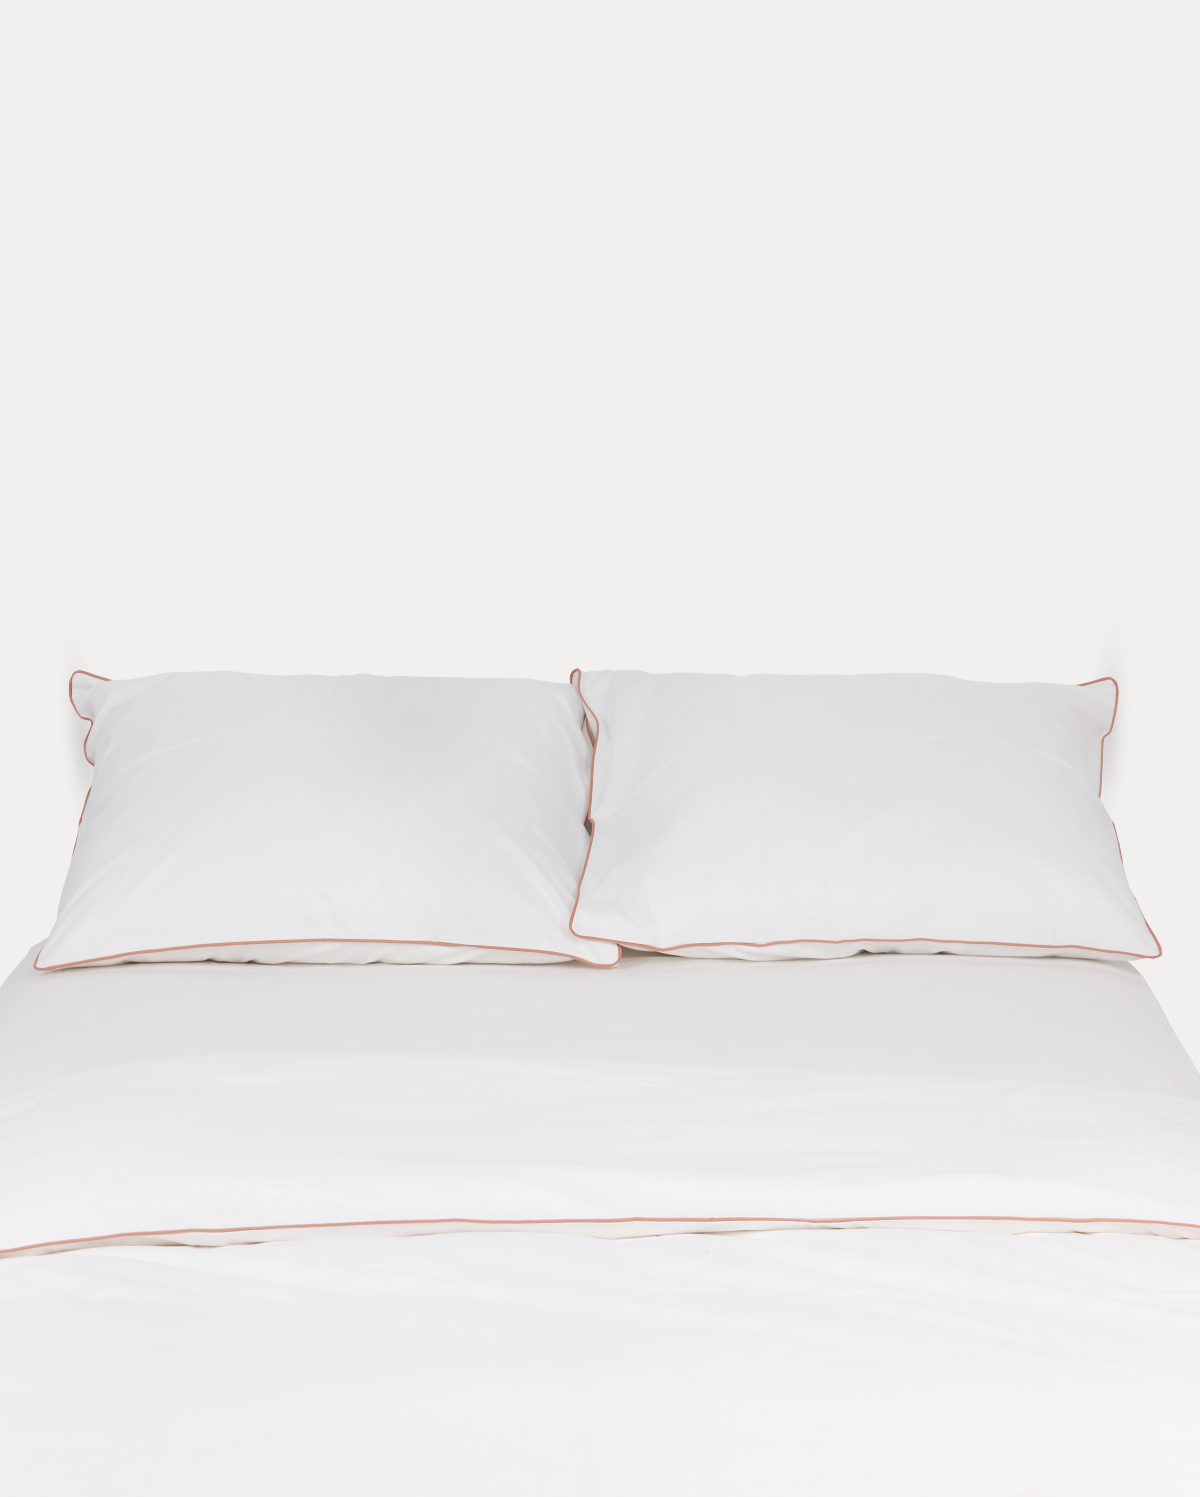 Classic Percale Duvet Cover- White with Peach Piped Edge